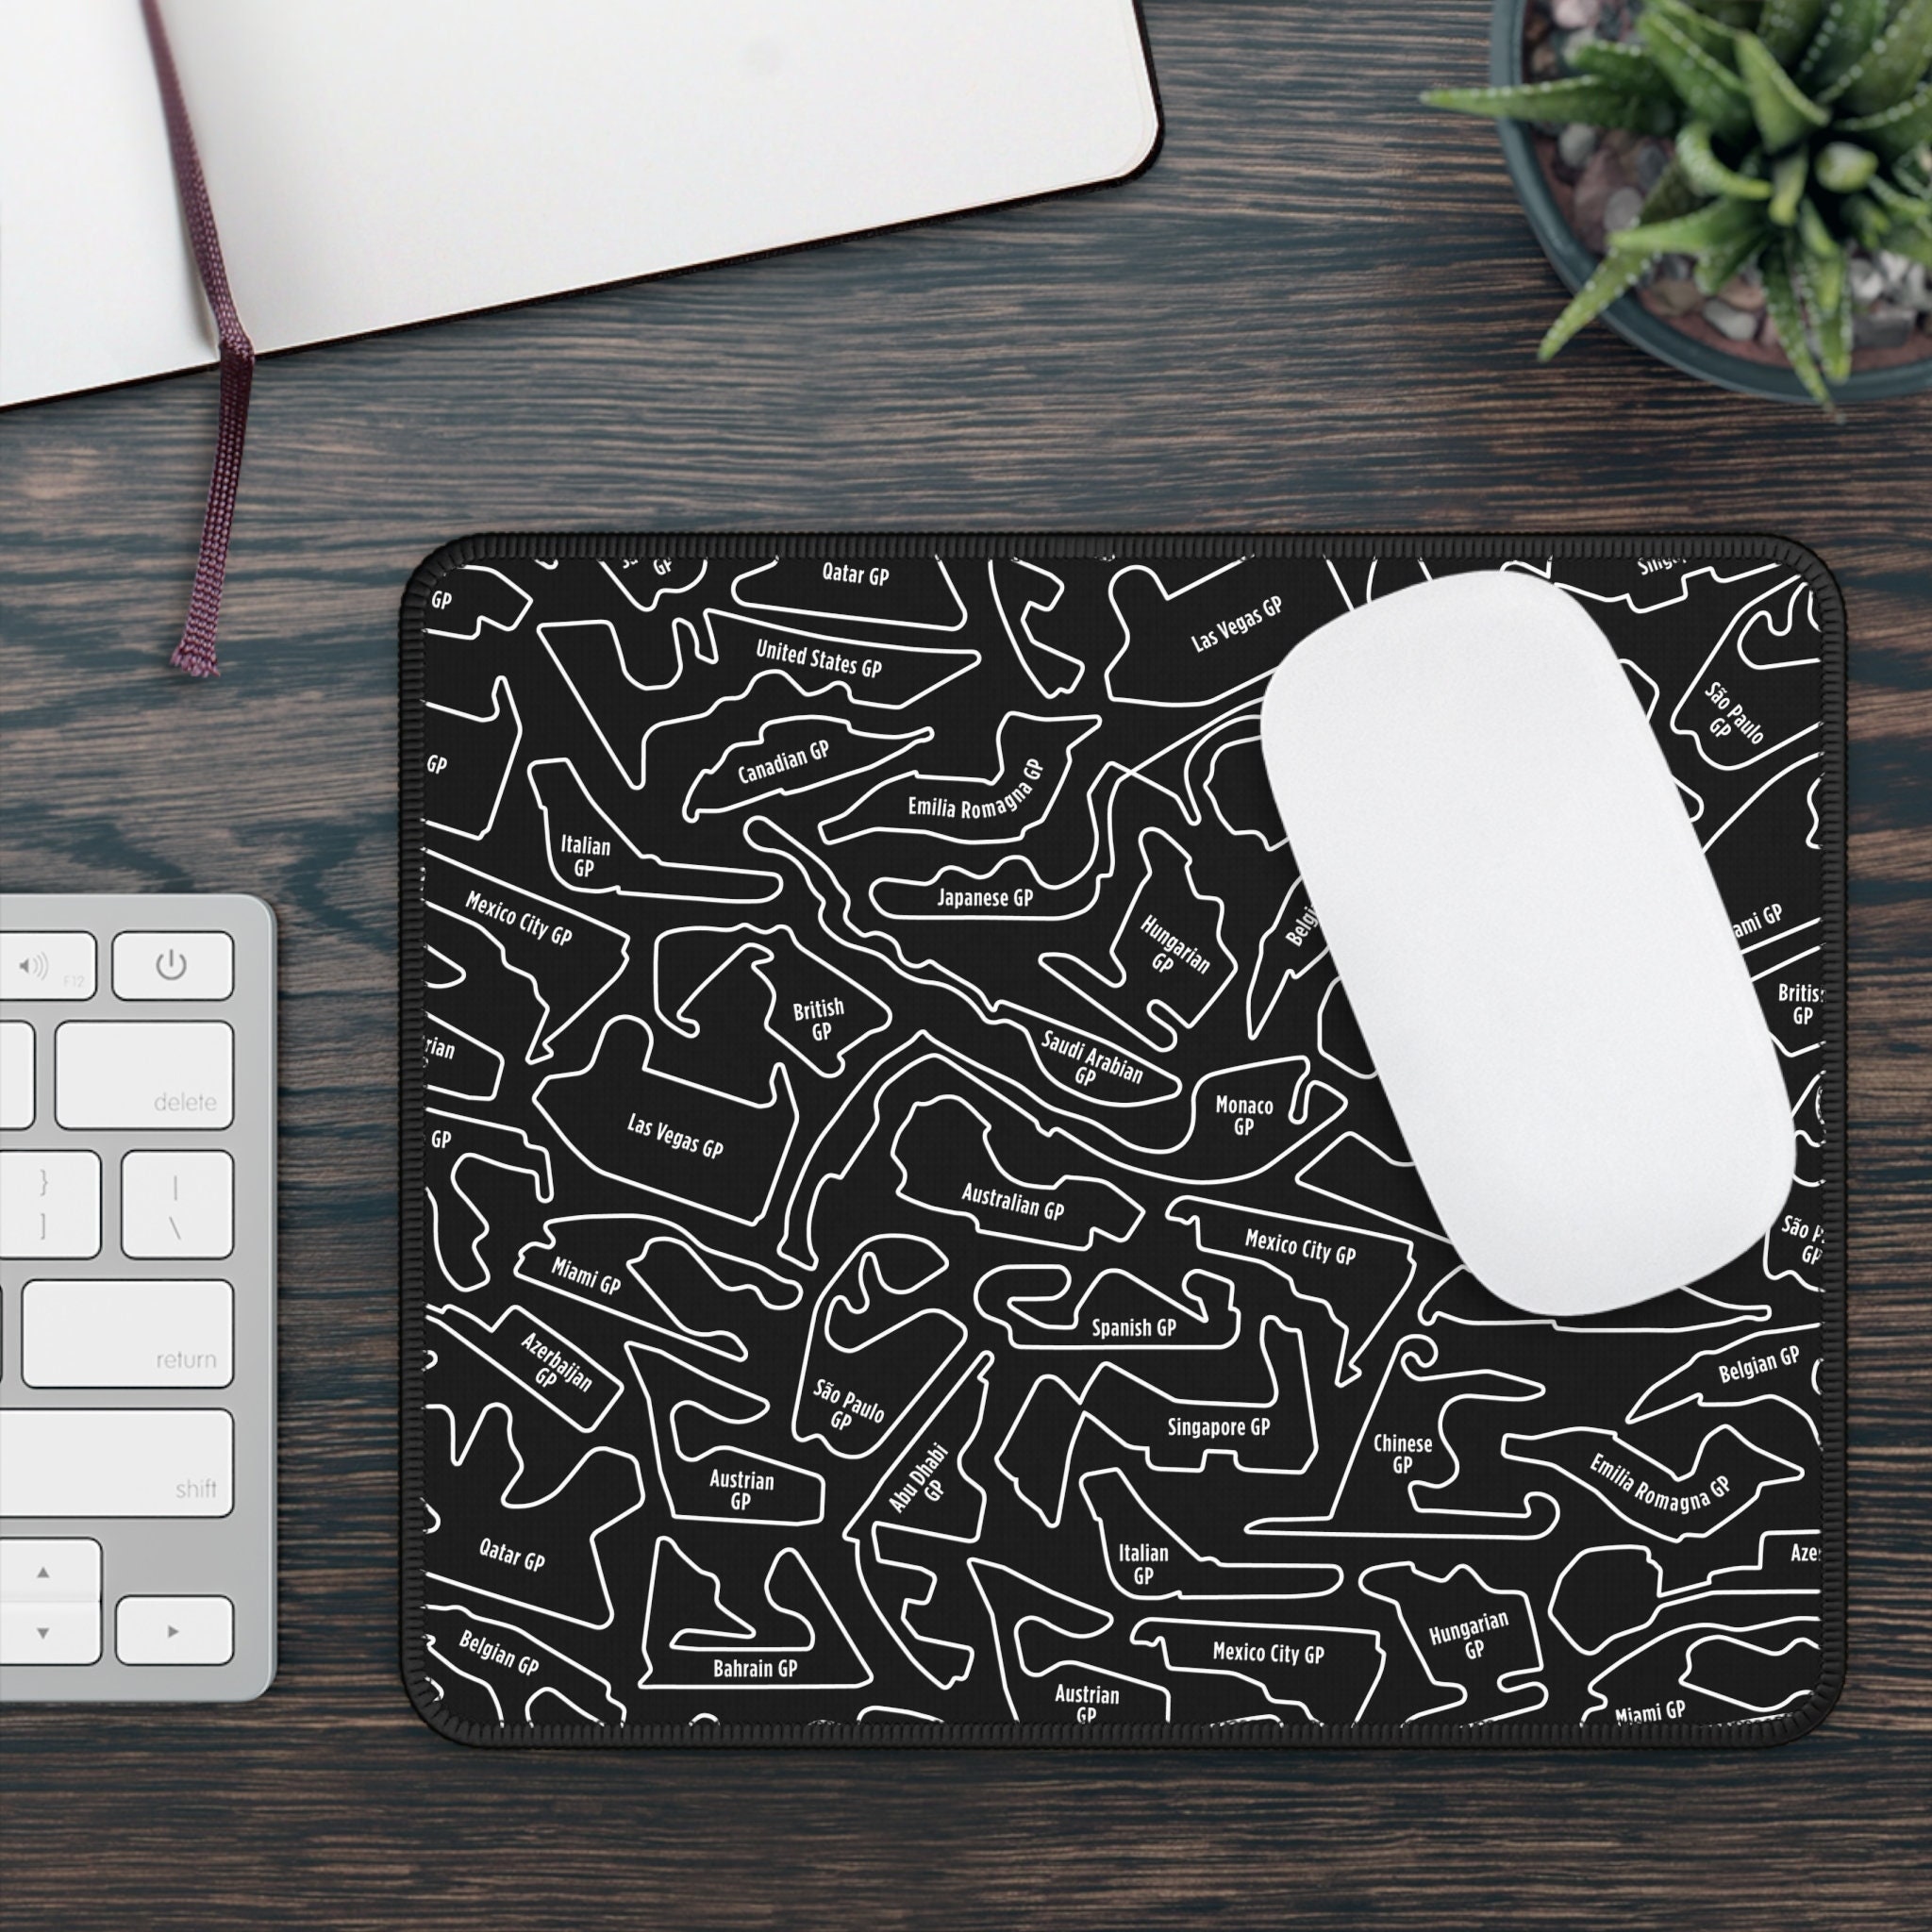 Blank Mouse Pad with Gel Wrist Rest Mouse Mat with Non-Slip PU Base Gaming  Mouse Pad, Sublimation Blank mouse pad